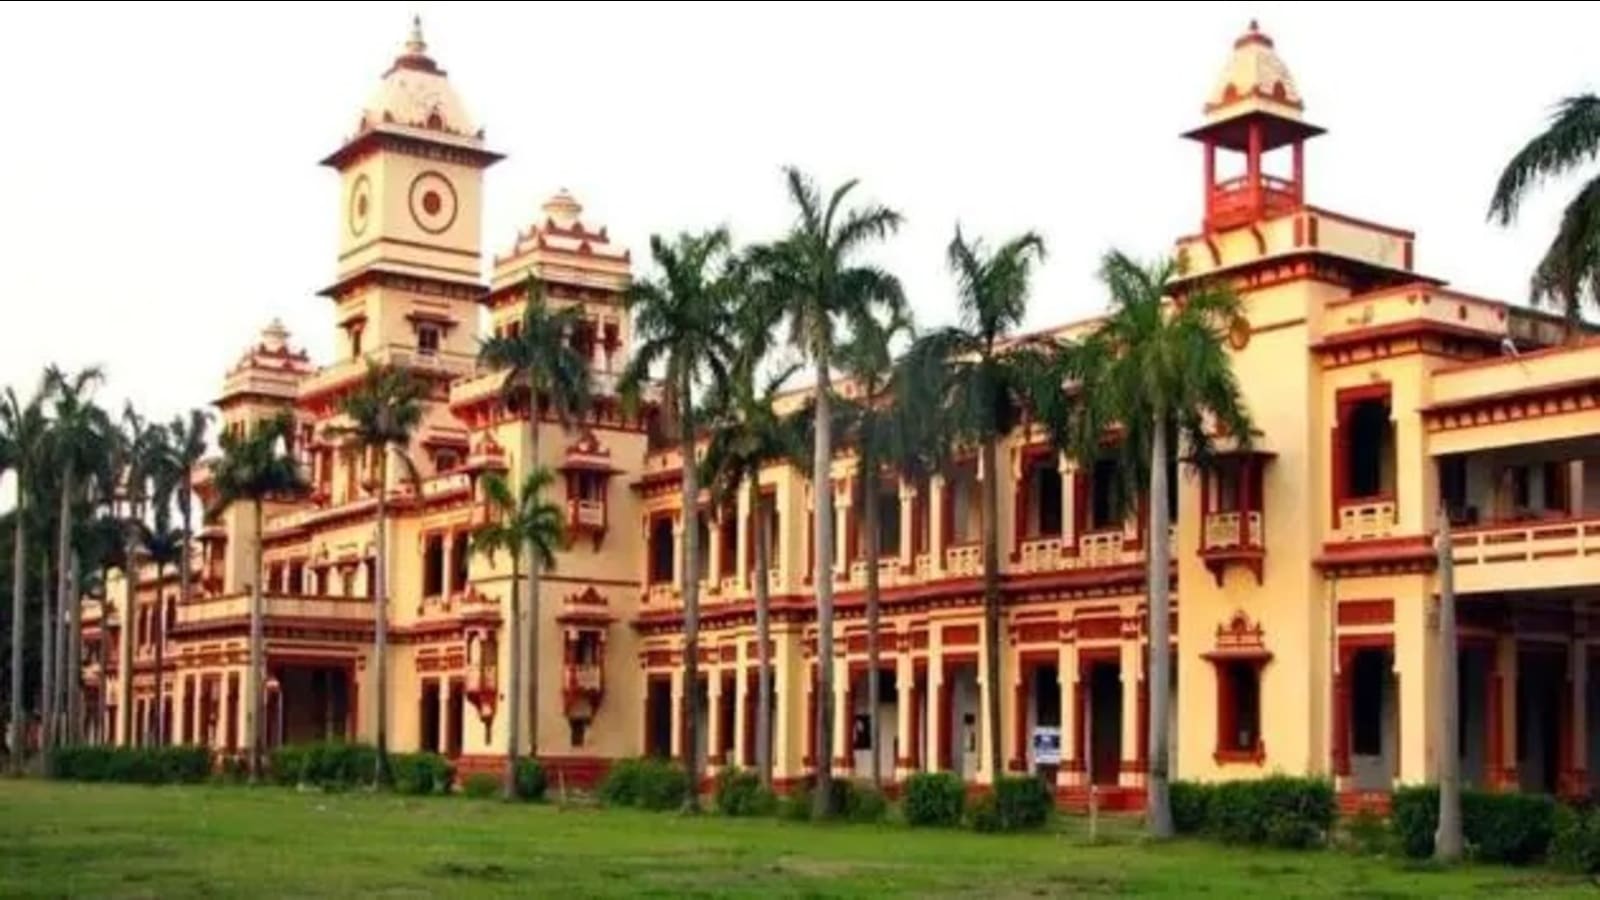 IITBHU nominated as expert for heritage sites by Central govt